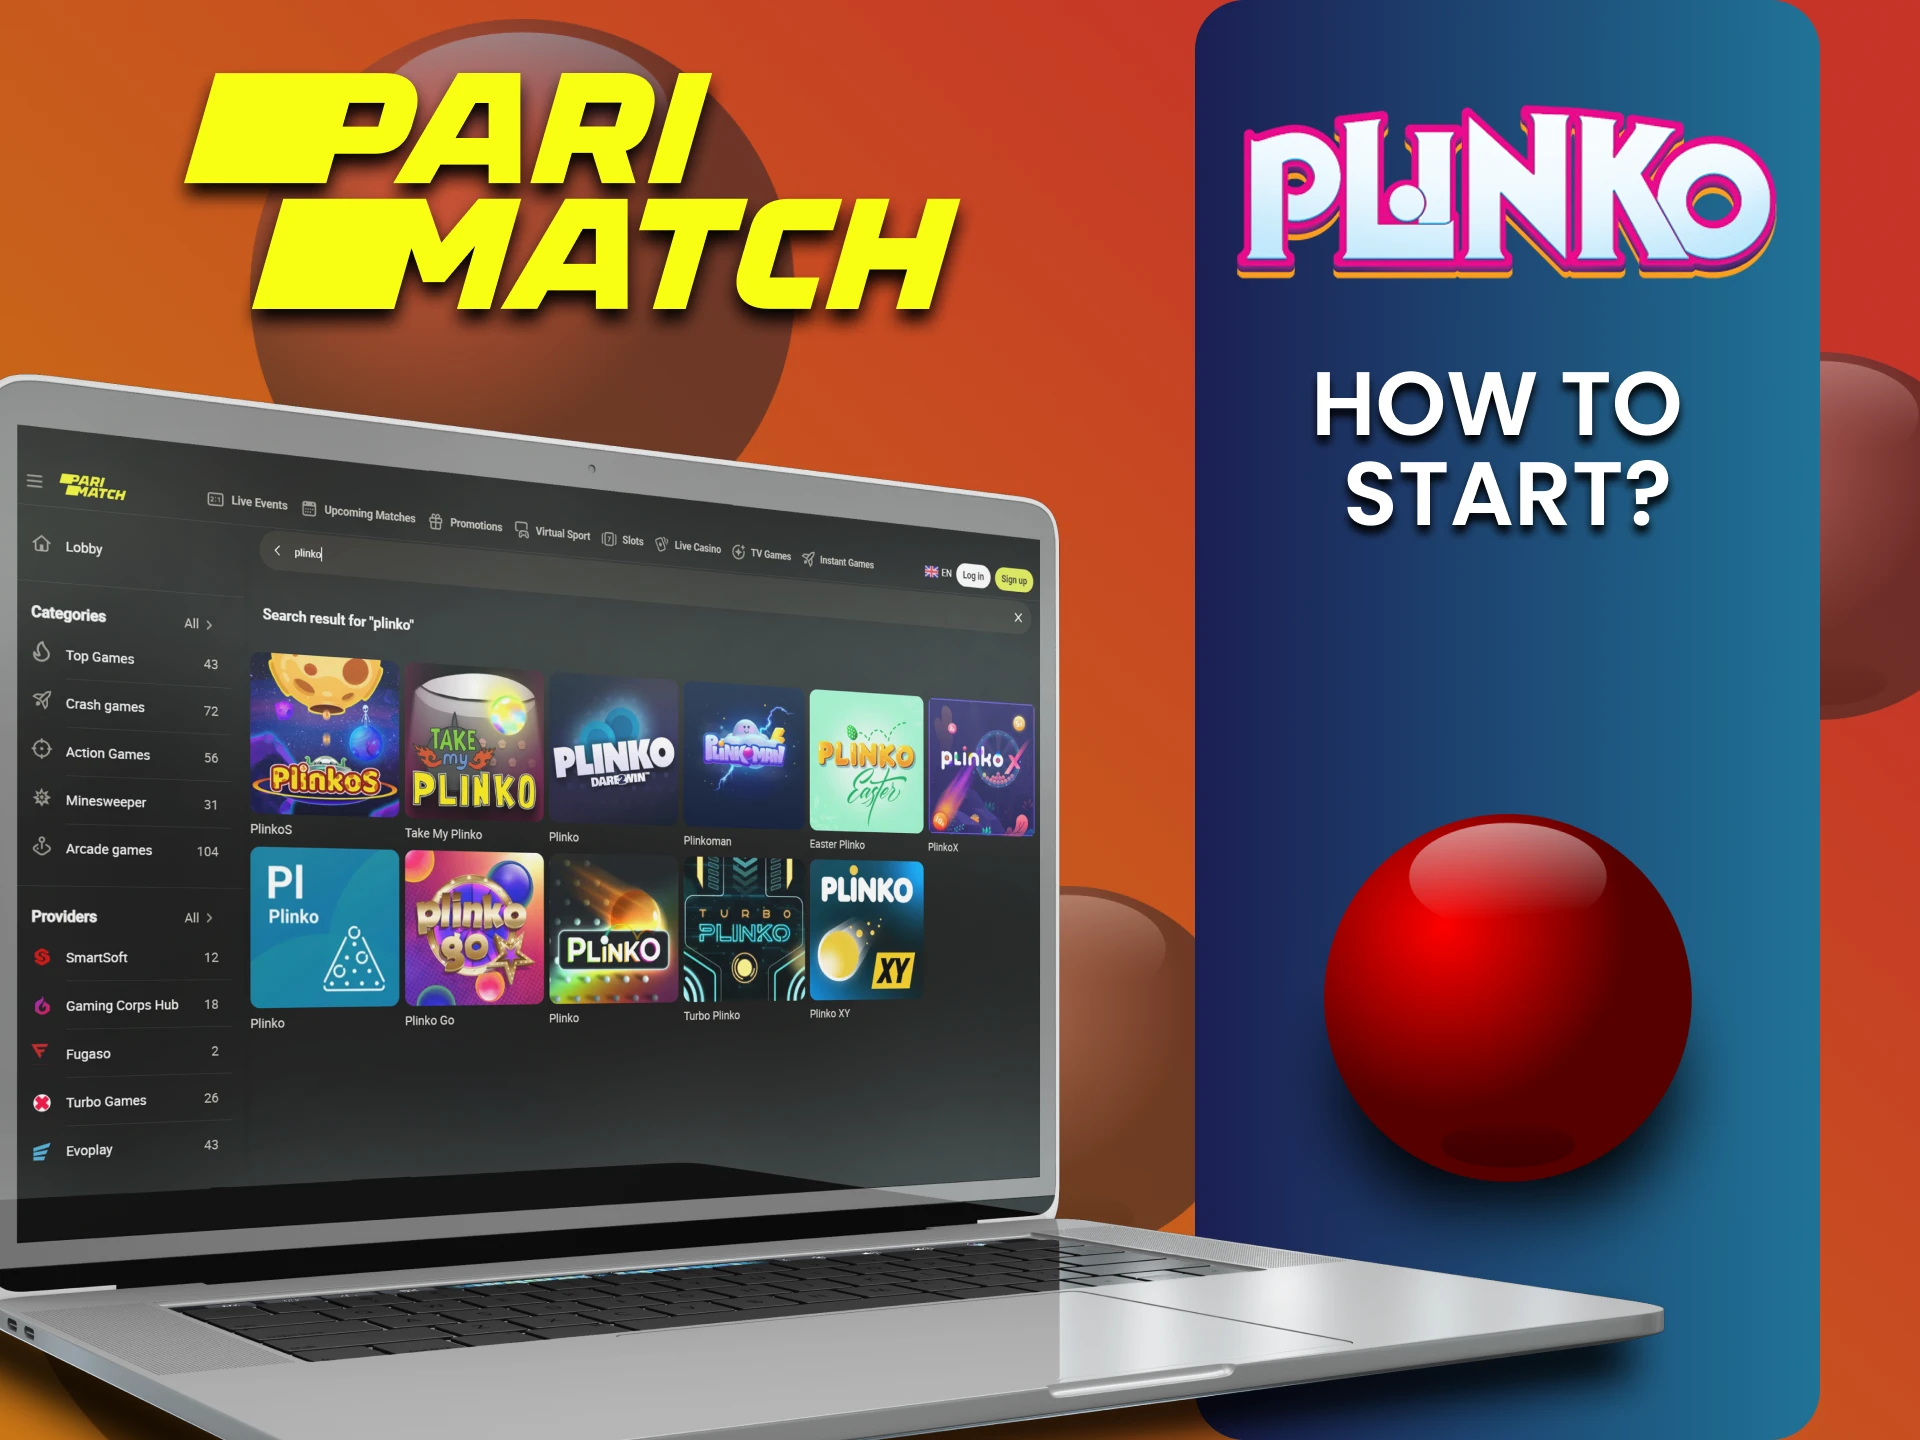 Choose the desired Parimatch section to play Plinko.